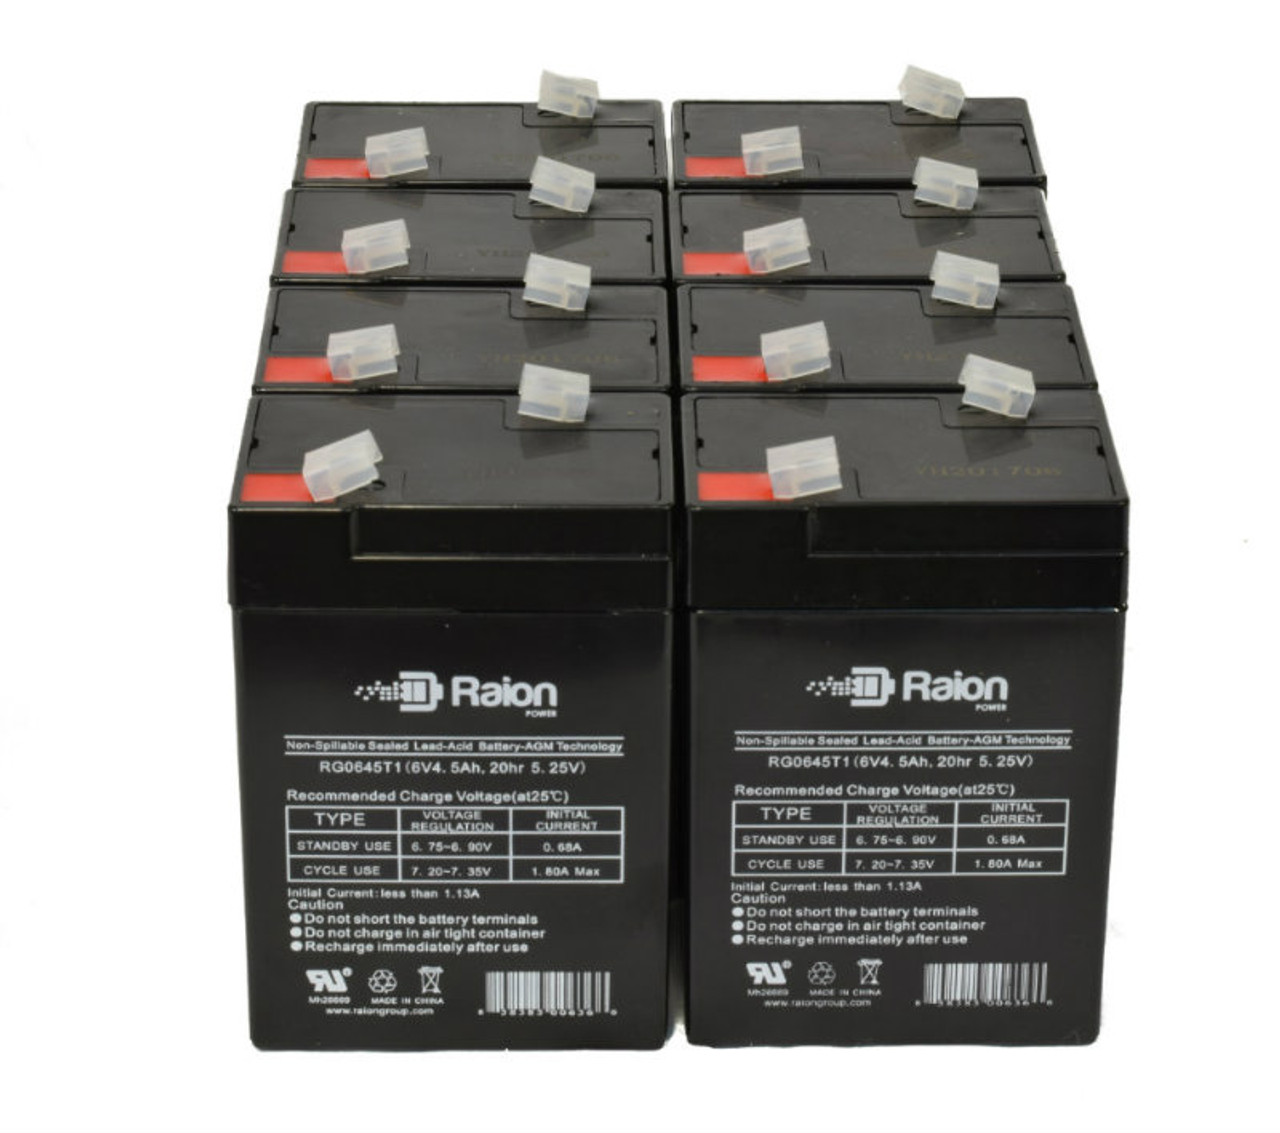 Raion Power 6V 4.5Ah Replacement Emergency Light Battery for National Power GS012P1 - 8 Pack